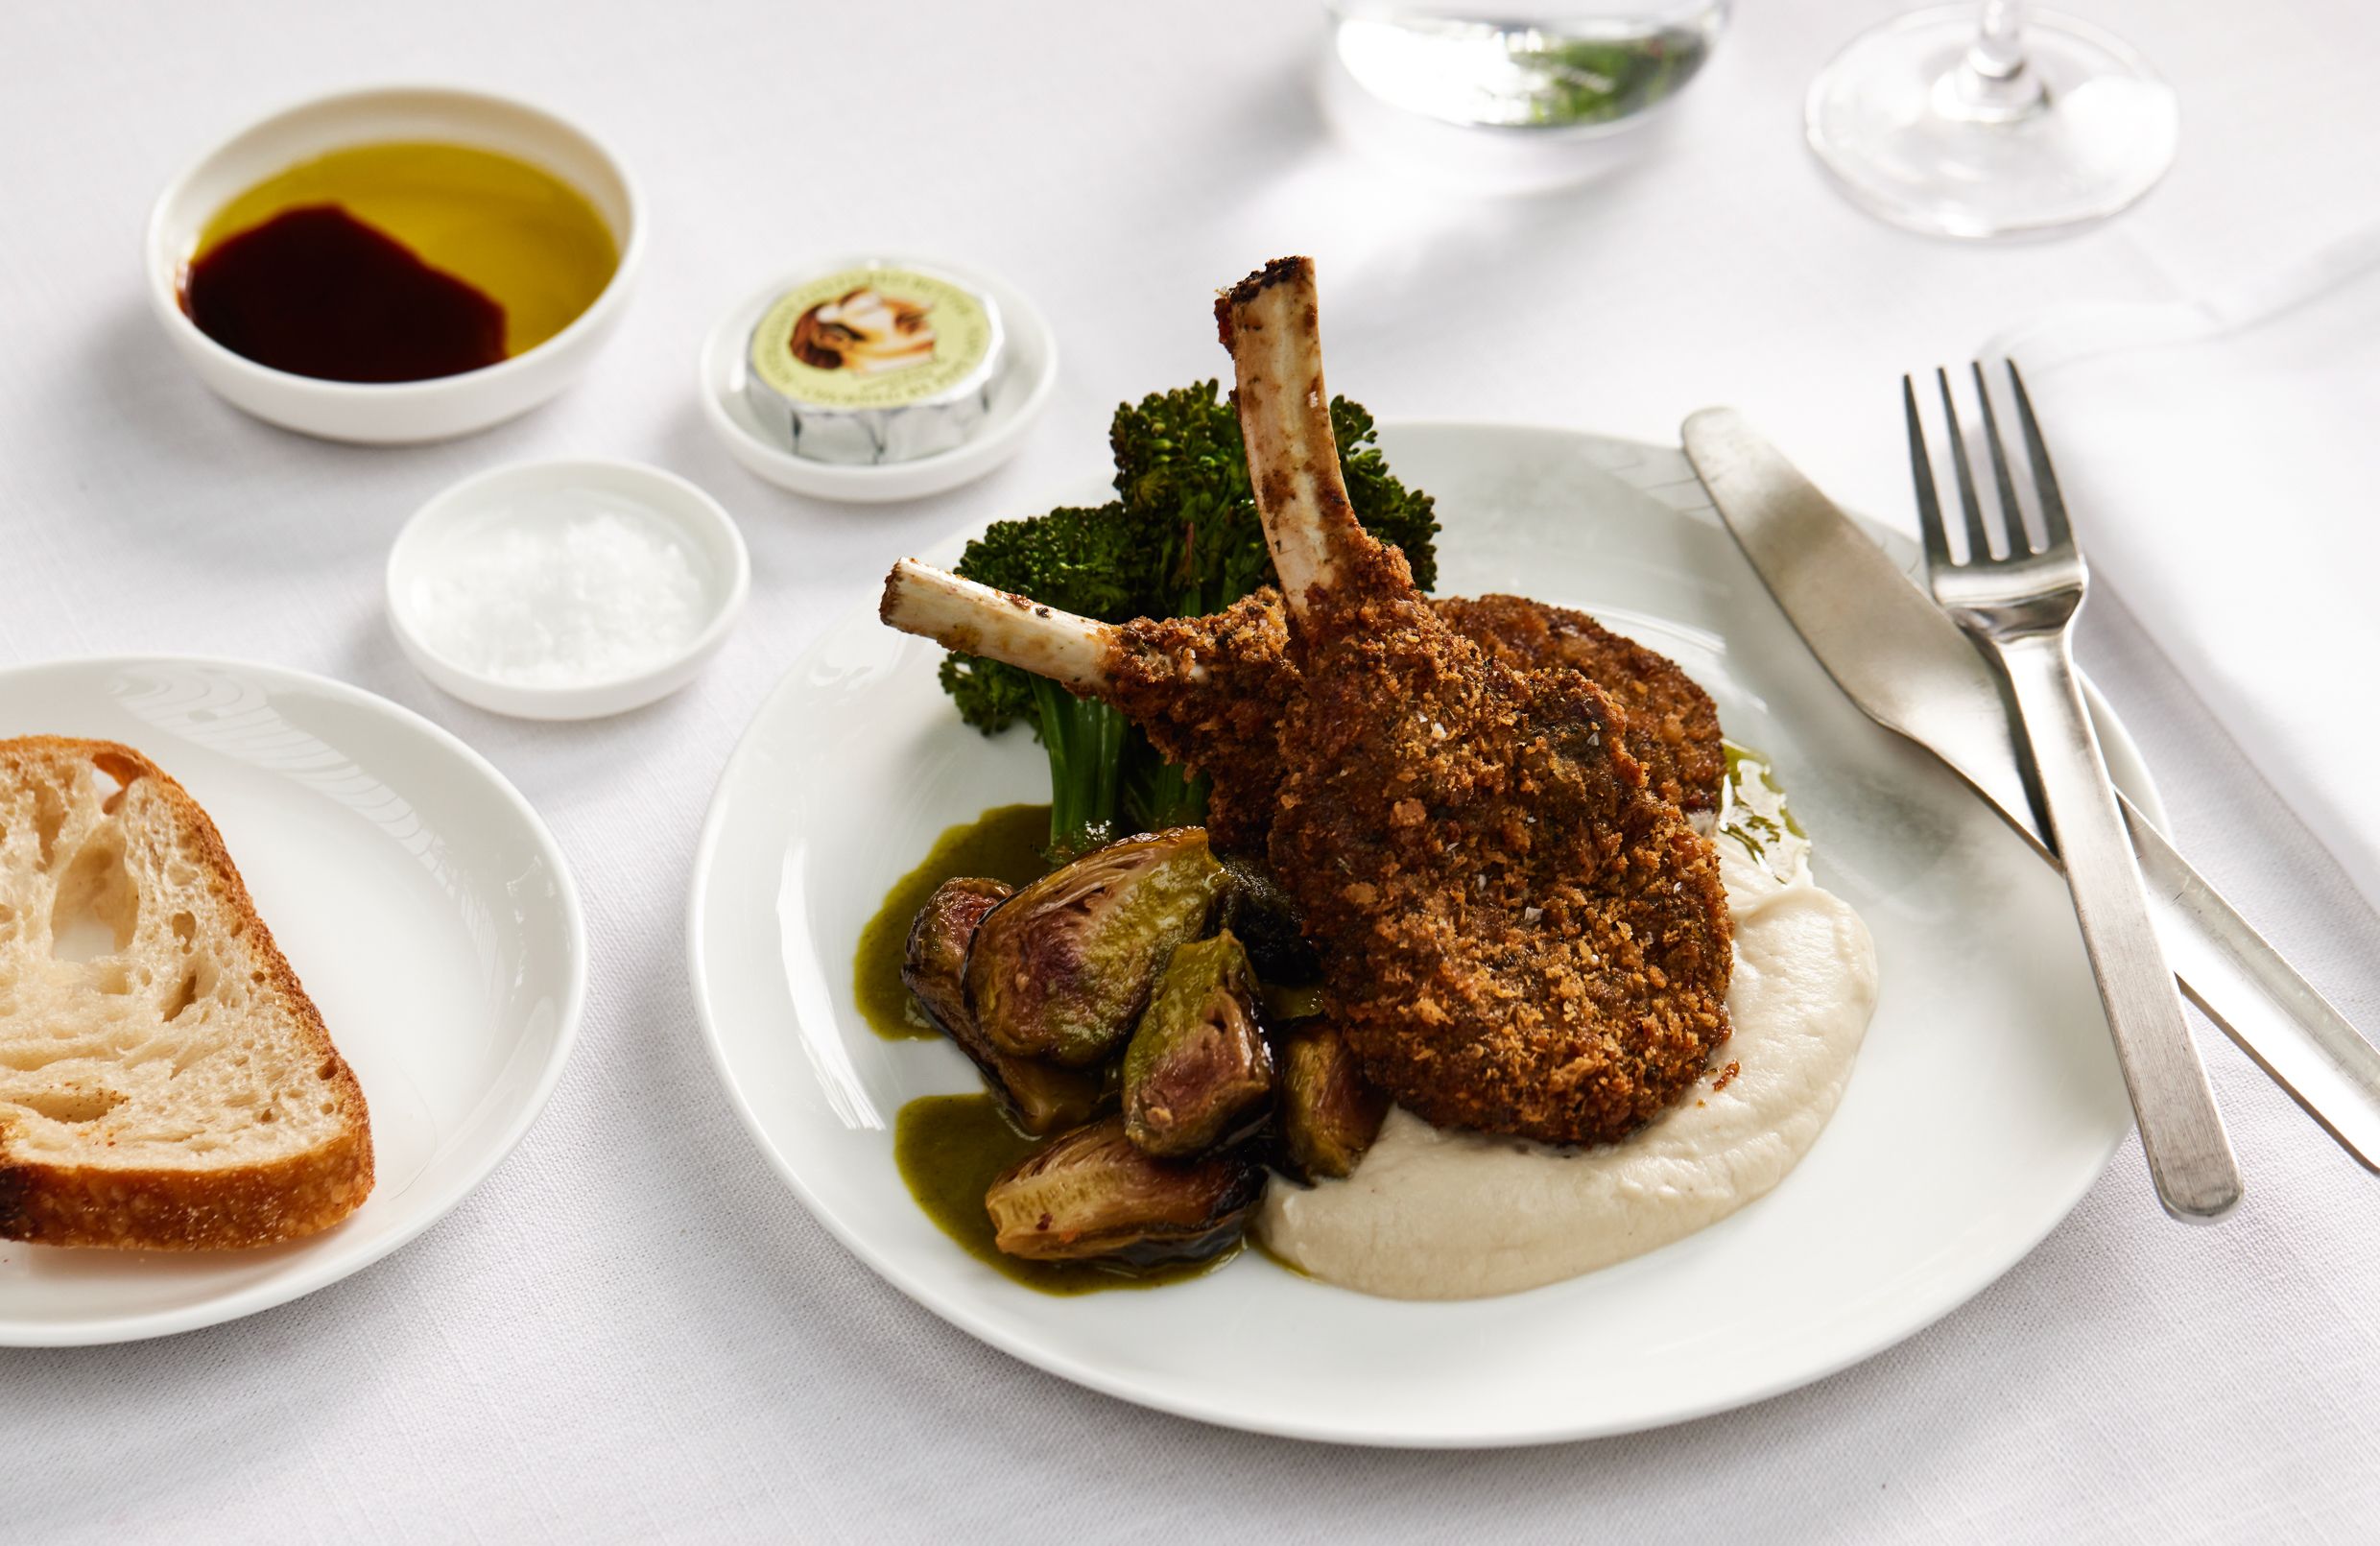 Qantas Crumbed Margra lamb cutlets with broccolini, brussels sprouts and lemon myrtle celeriac puree (First)